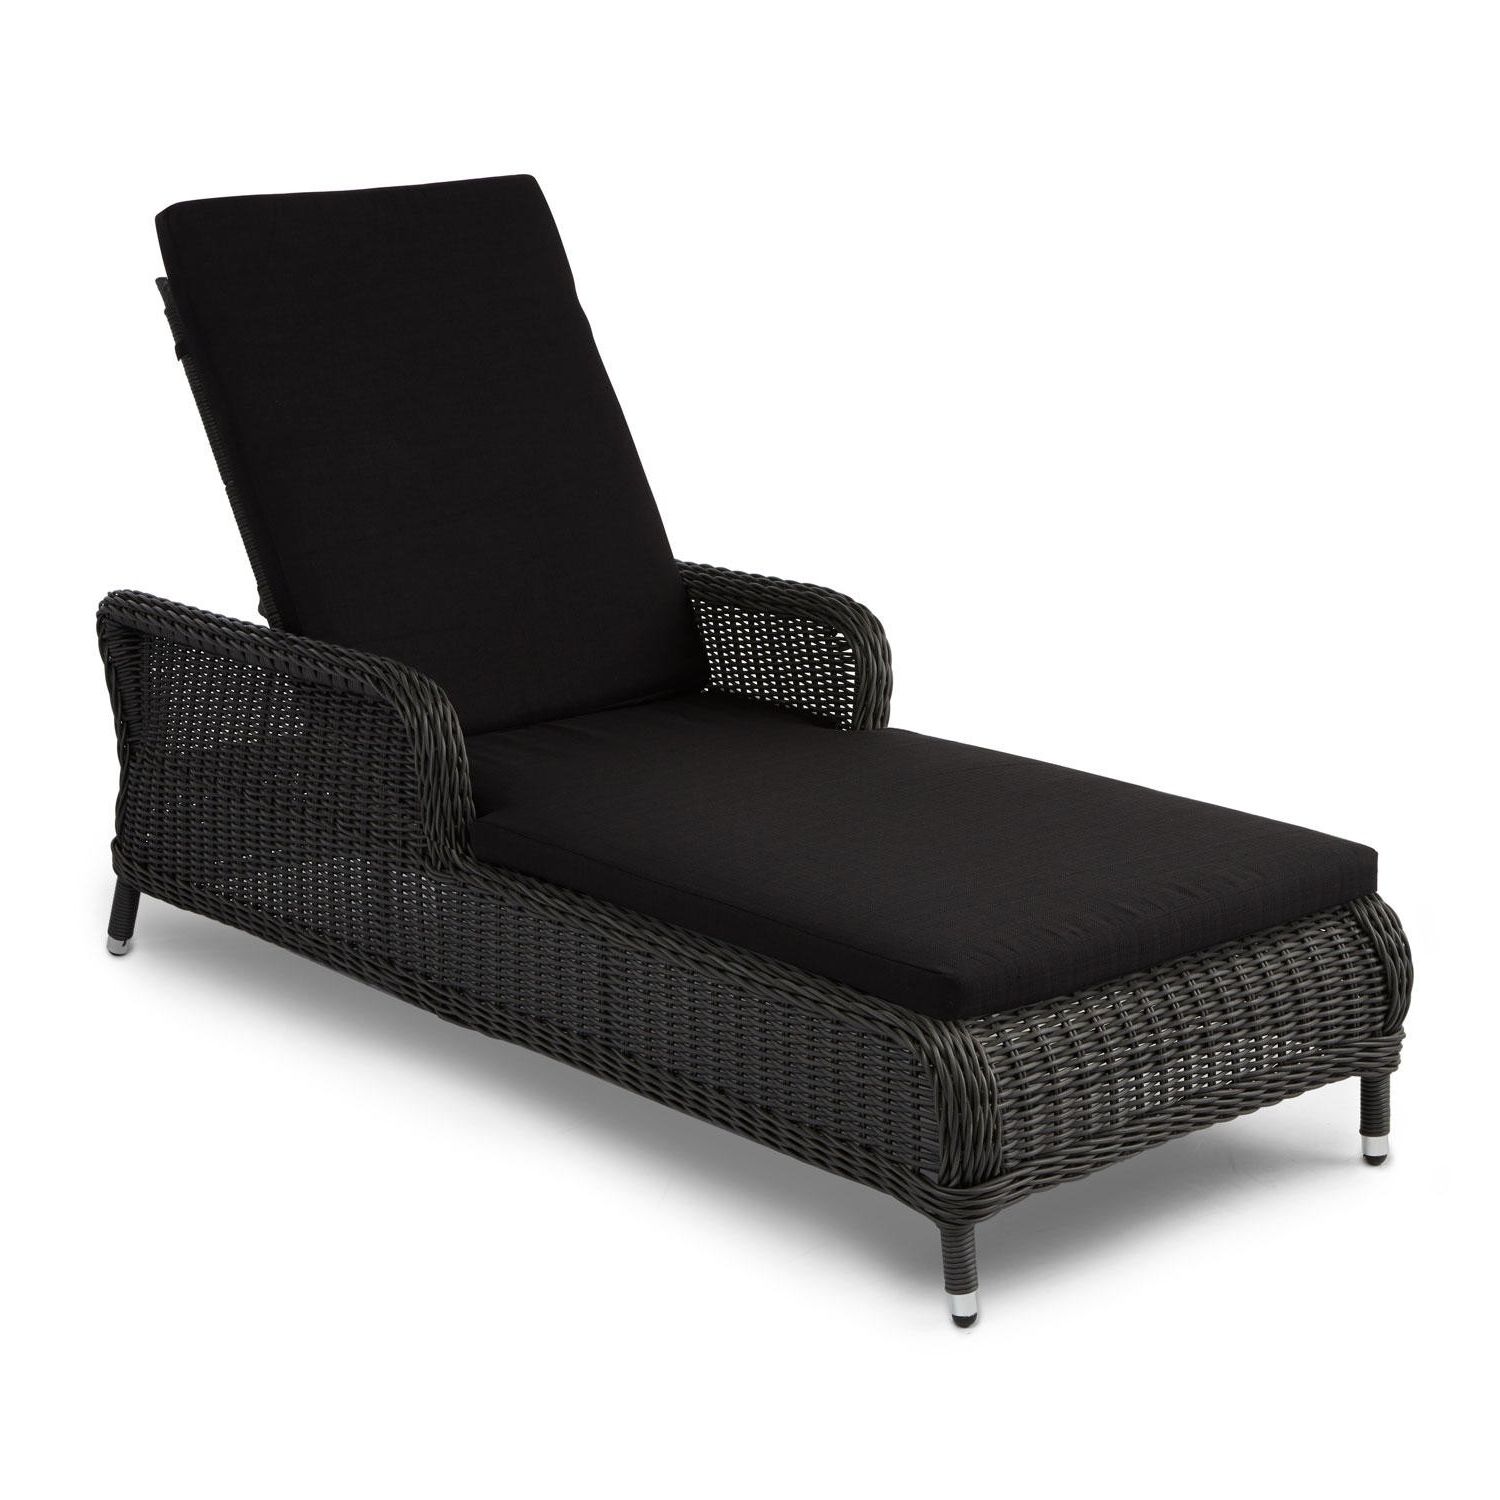 Black Chaise Lounge Chairs • Lounge Chairs Ideas Pertaining To Best And Newest Boca Chaise Lounge Outdoor Chairs With Pillows (Photo 8 of 15)